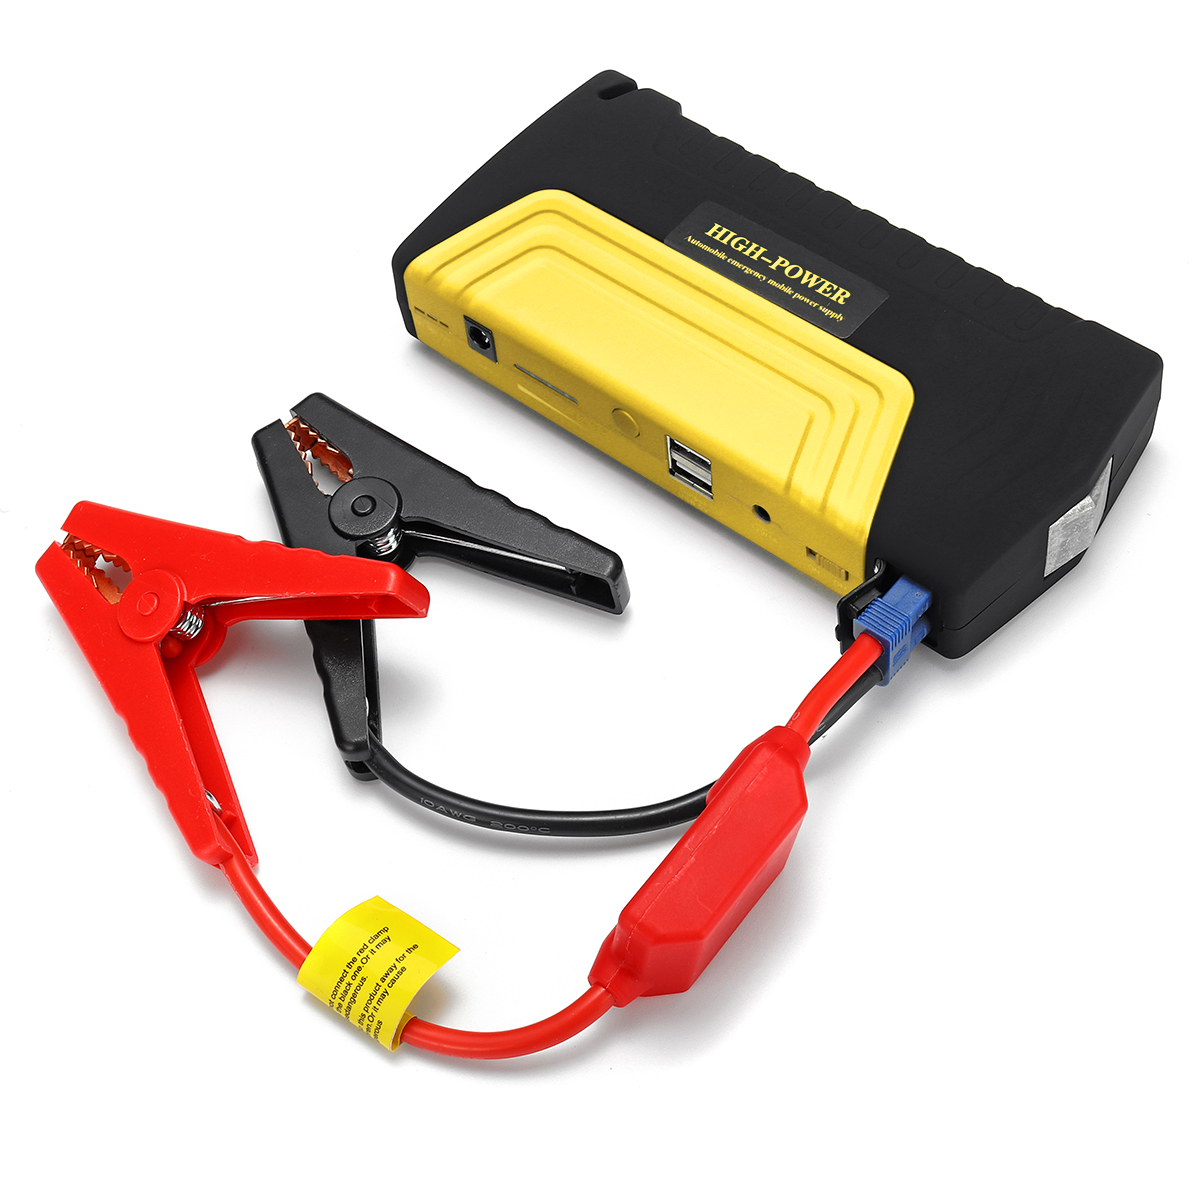 

Portable Car Jump Starter 600A Peak 12V 68800mAh Emergency Battery Booster Pack with Safety Hammer Flashlight